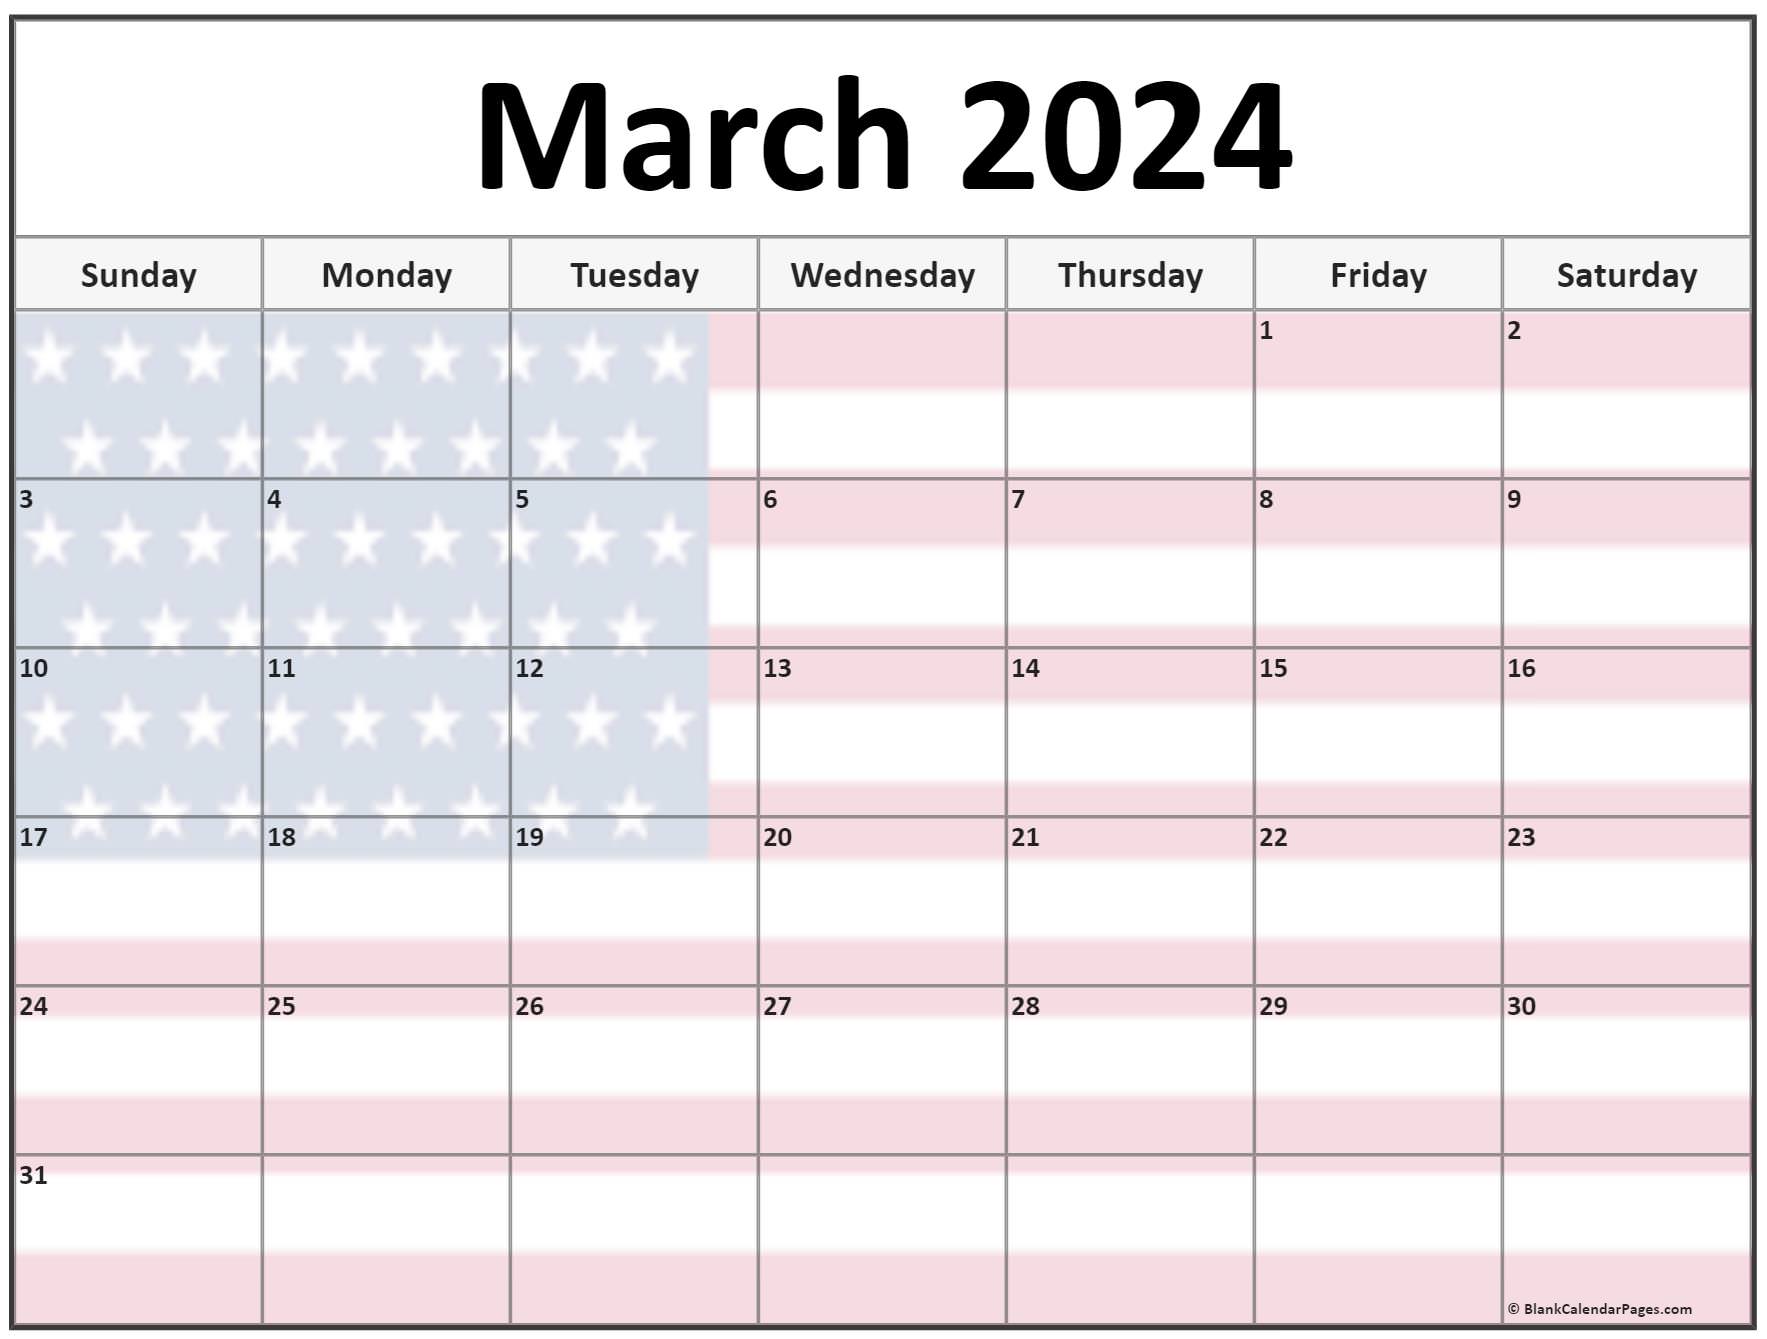 Collection of March 2023 photo calendars with image filters.